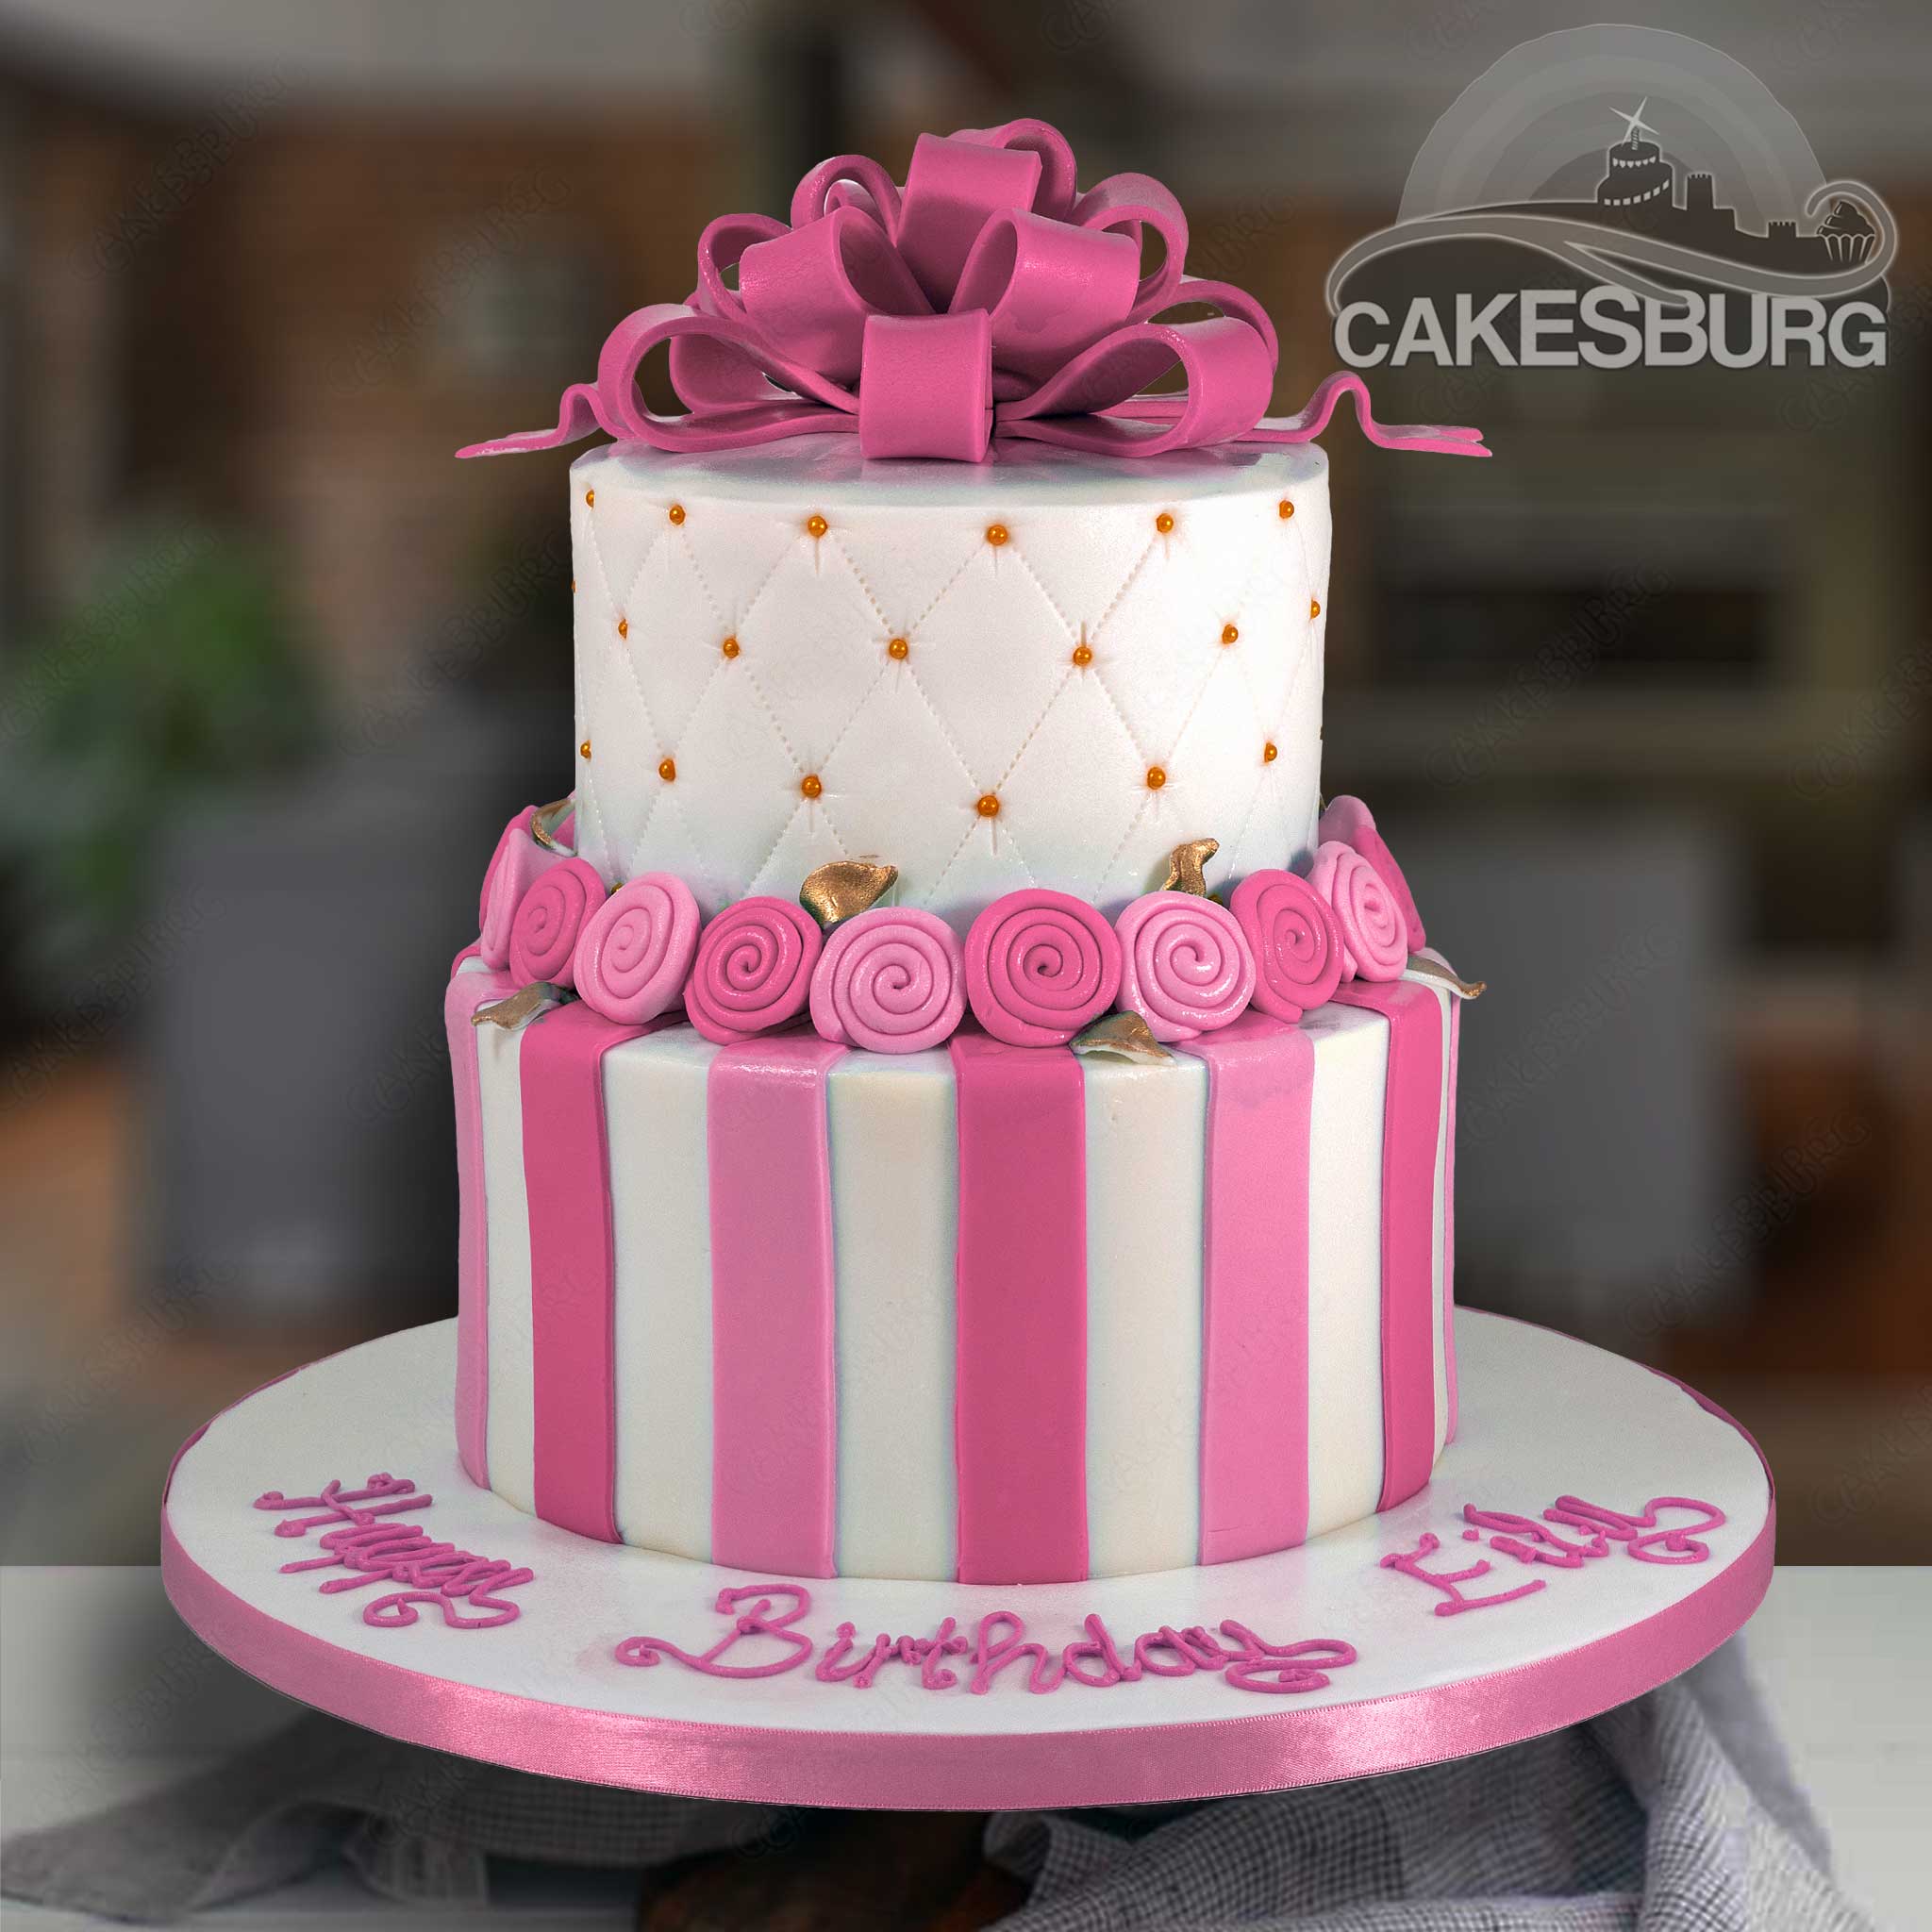 Occasions Cakes, Coffees & More - Best Wedding Cakes, Eggless Cakes  ,Naughty Cakes, Customised Cake topper, Photo Cake, Party Props, Cup Cakes,  Best Cake Shop in Kormangala Bengaluru, Bengaluru Cake Shop -